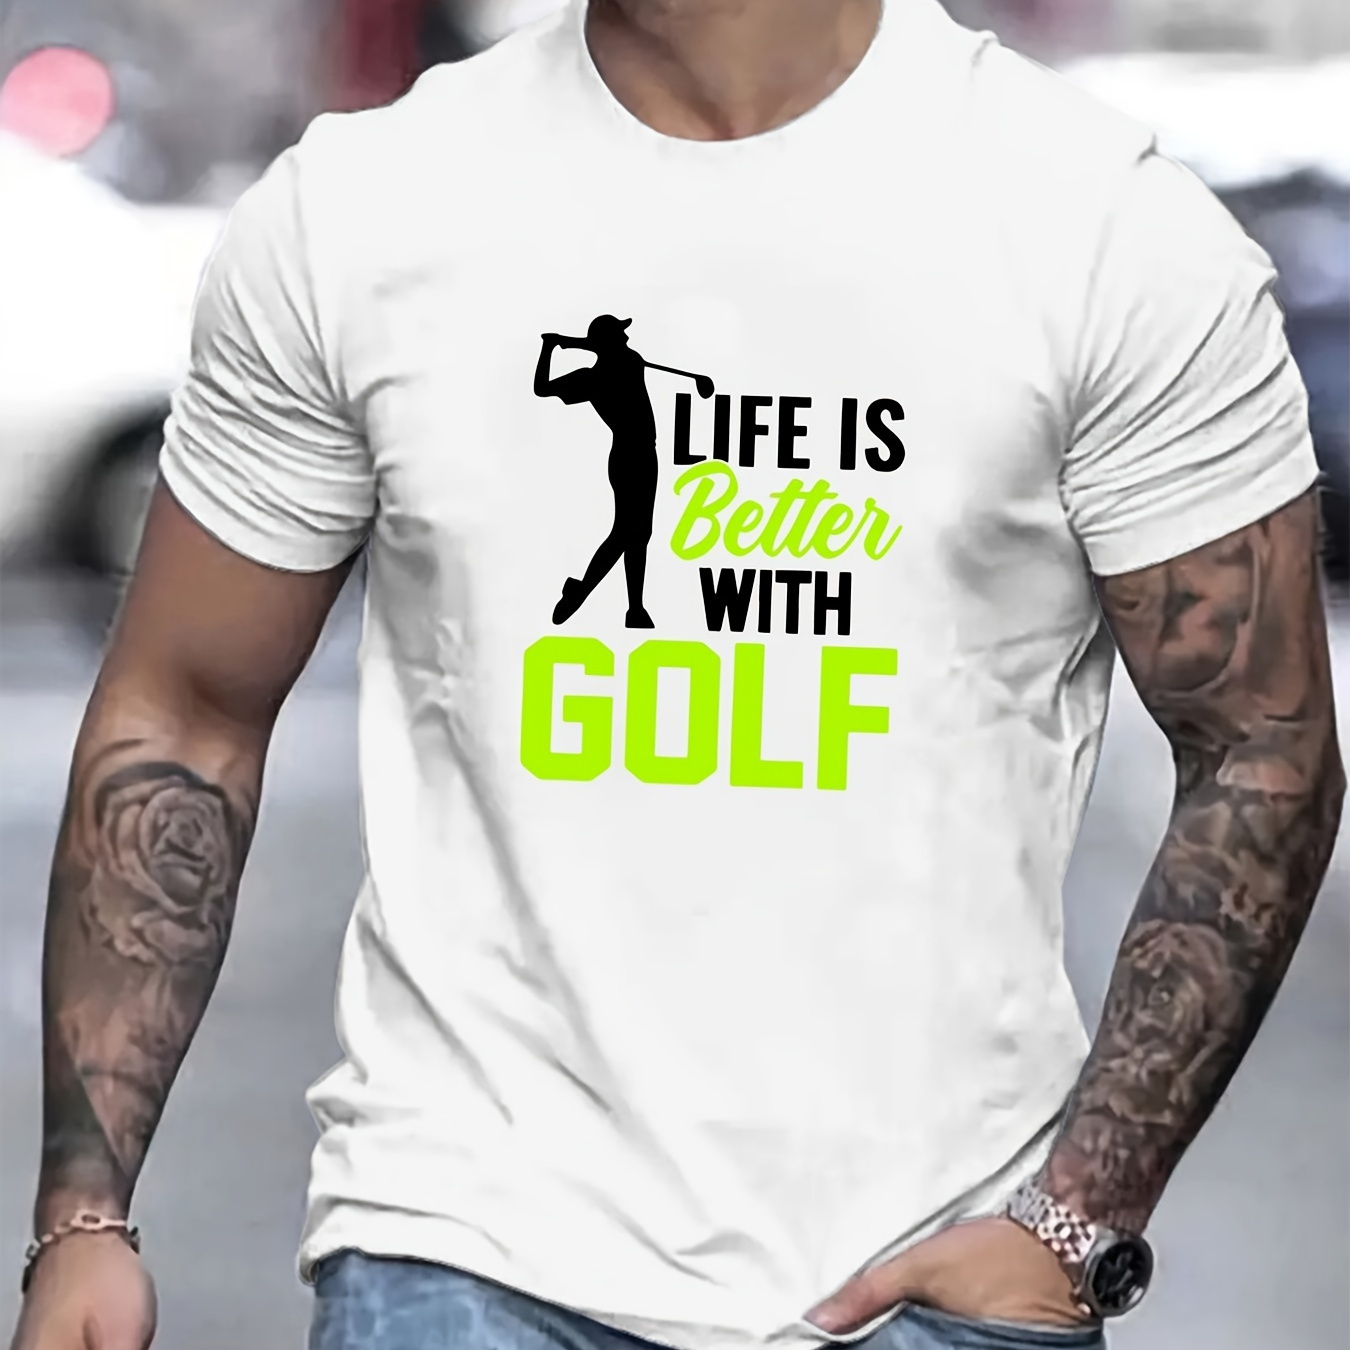 

Life Is Better With Golf And Golf Player Anime Graphic Print, Men's Novel Graphic Design T-shirt, Casual Comfy Tees For Summer, Men's Clothing Tops For Daily Activities